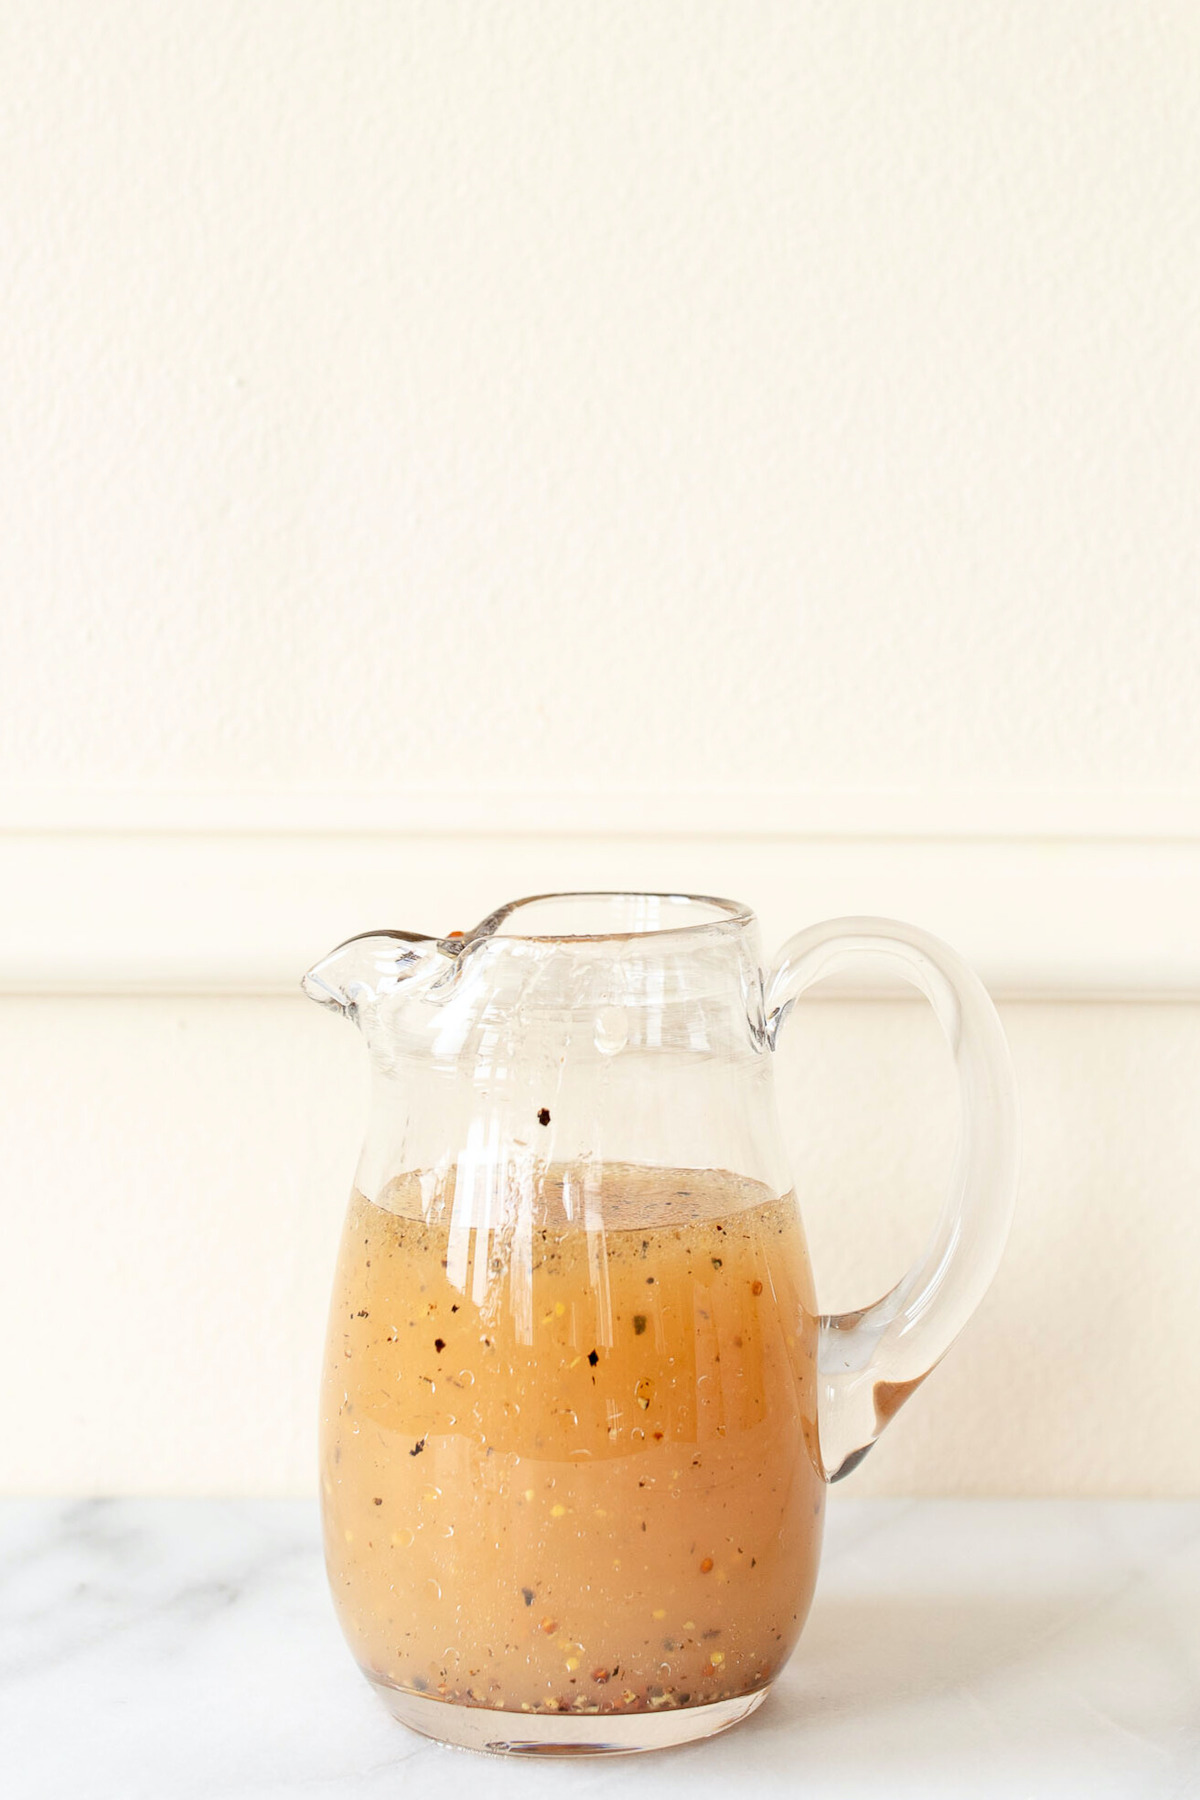 A glass jug with apple cider vinaigrette dressing in it.